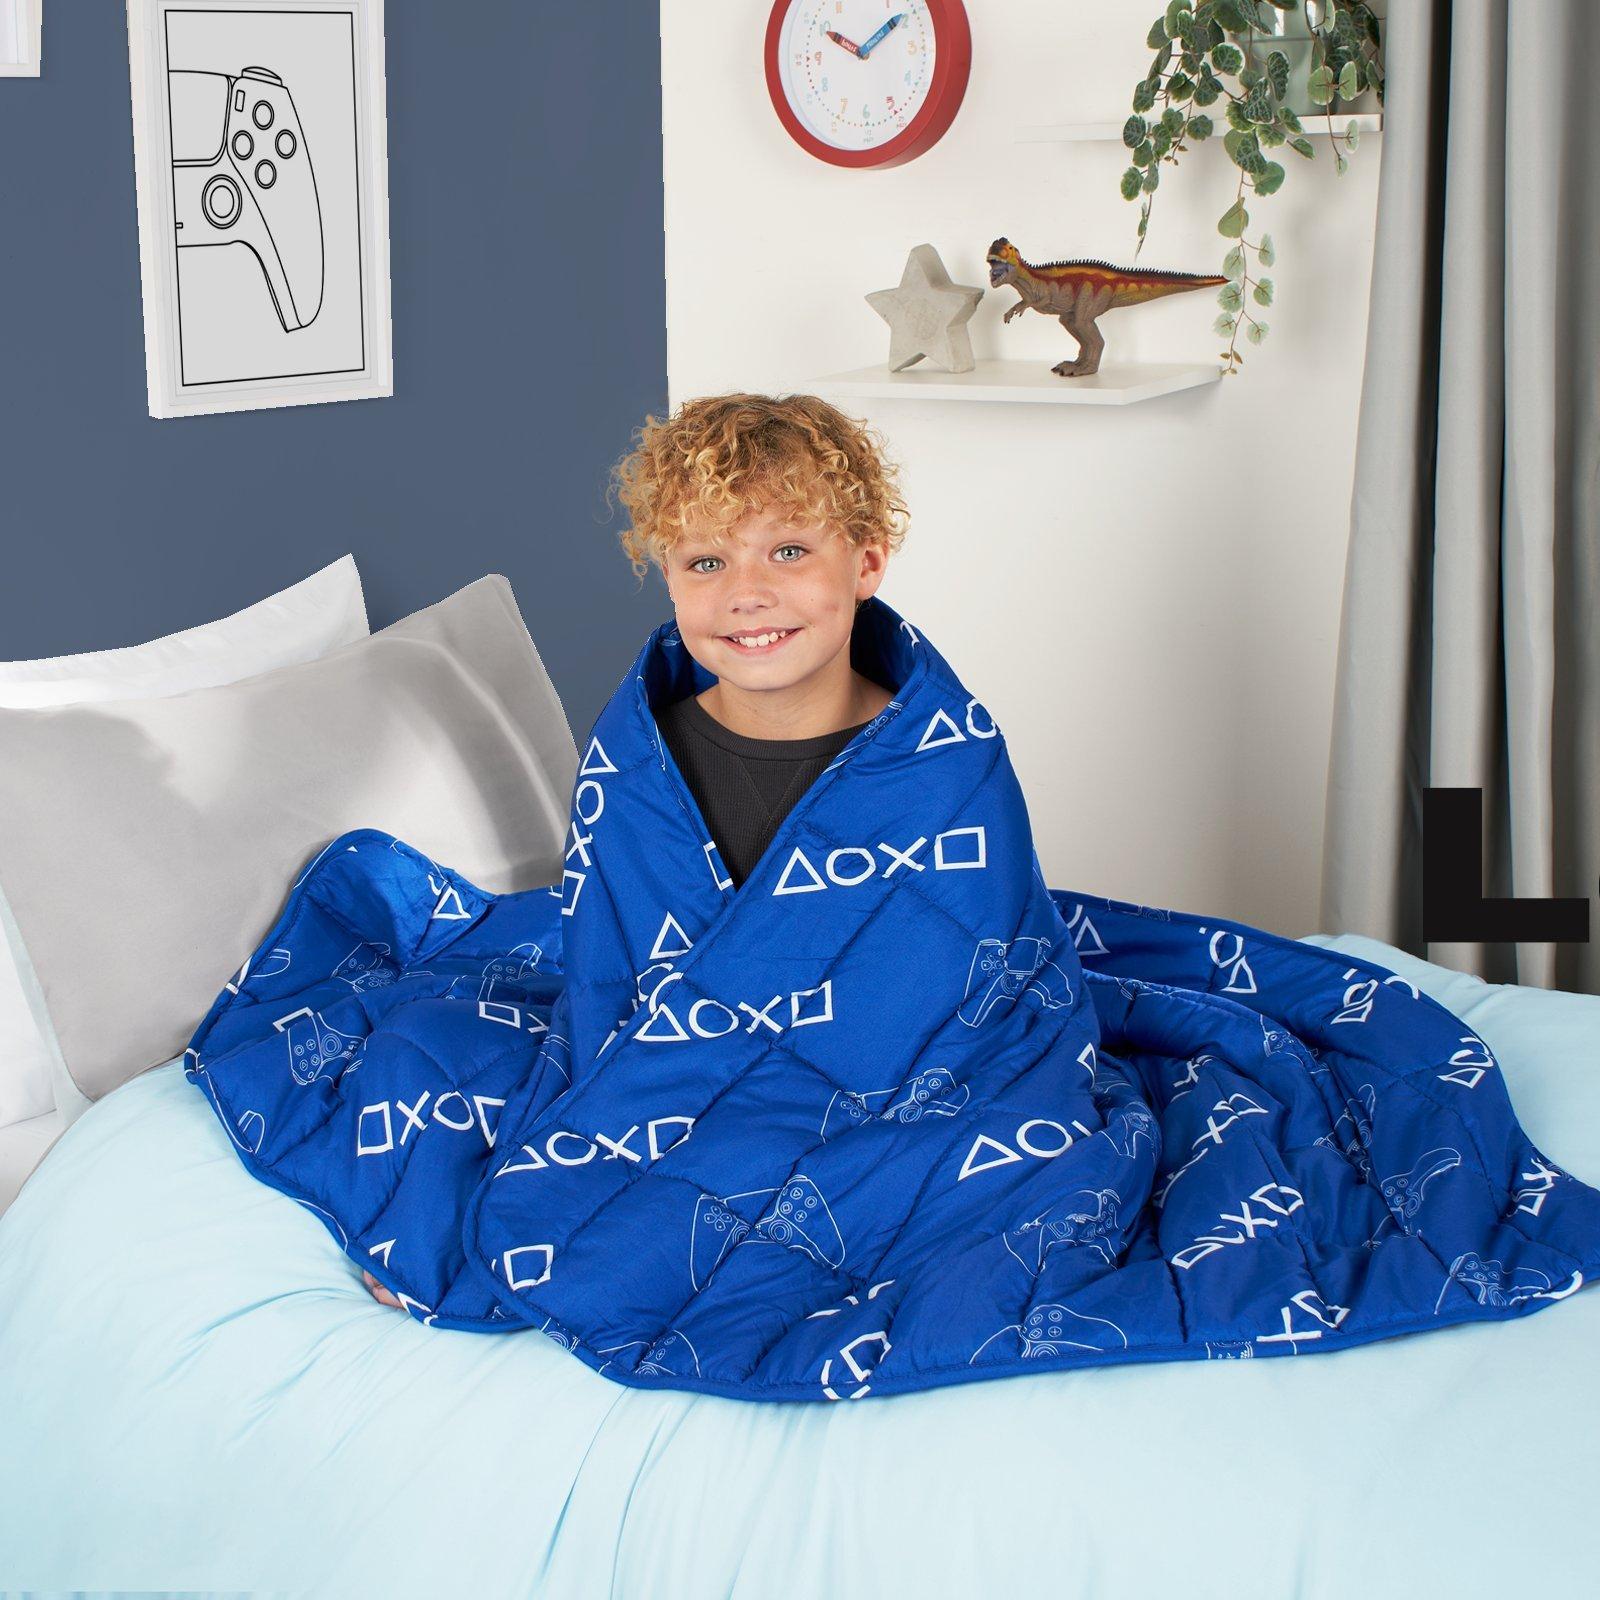 Play Gaming Station Weighted Blanket Sensory Sleep Therapy 3kg Kids Blue Throw Over Bed